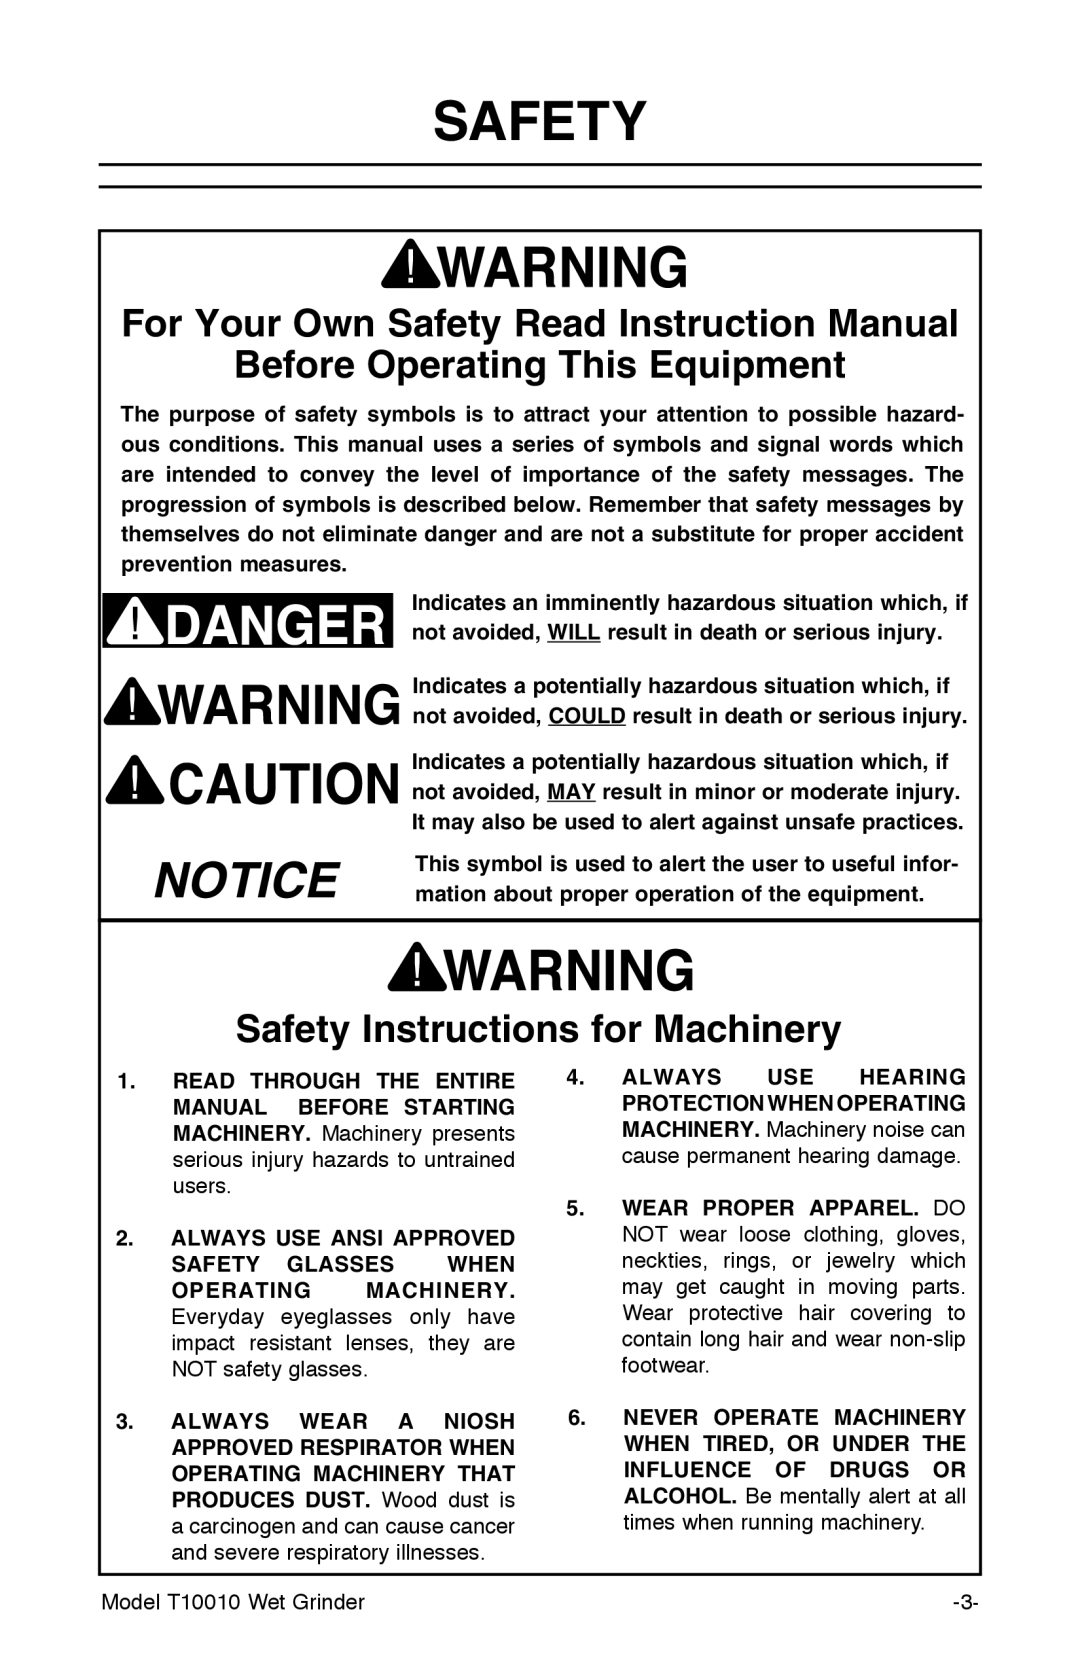 Grizzly T10010 manual For Your Own Safety Read Instruction Manual, Before Operating This Equipment 